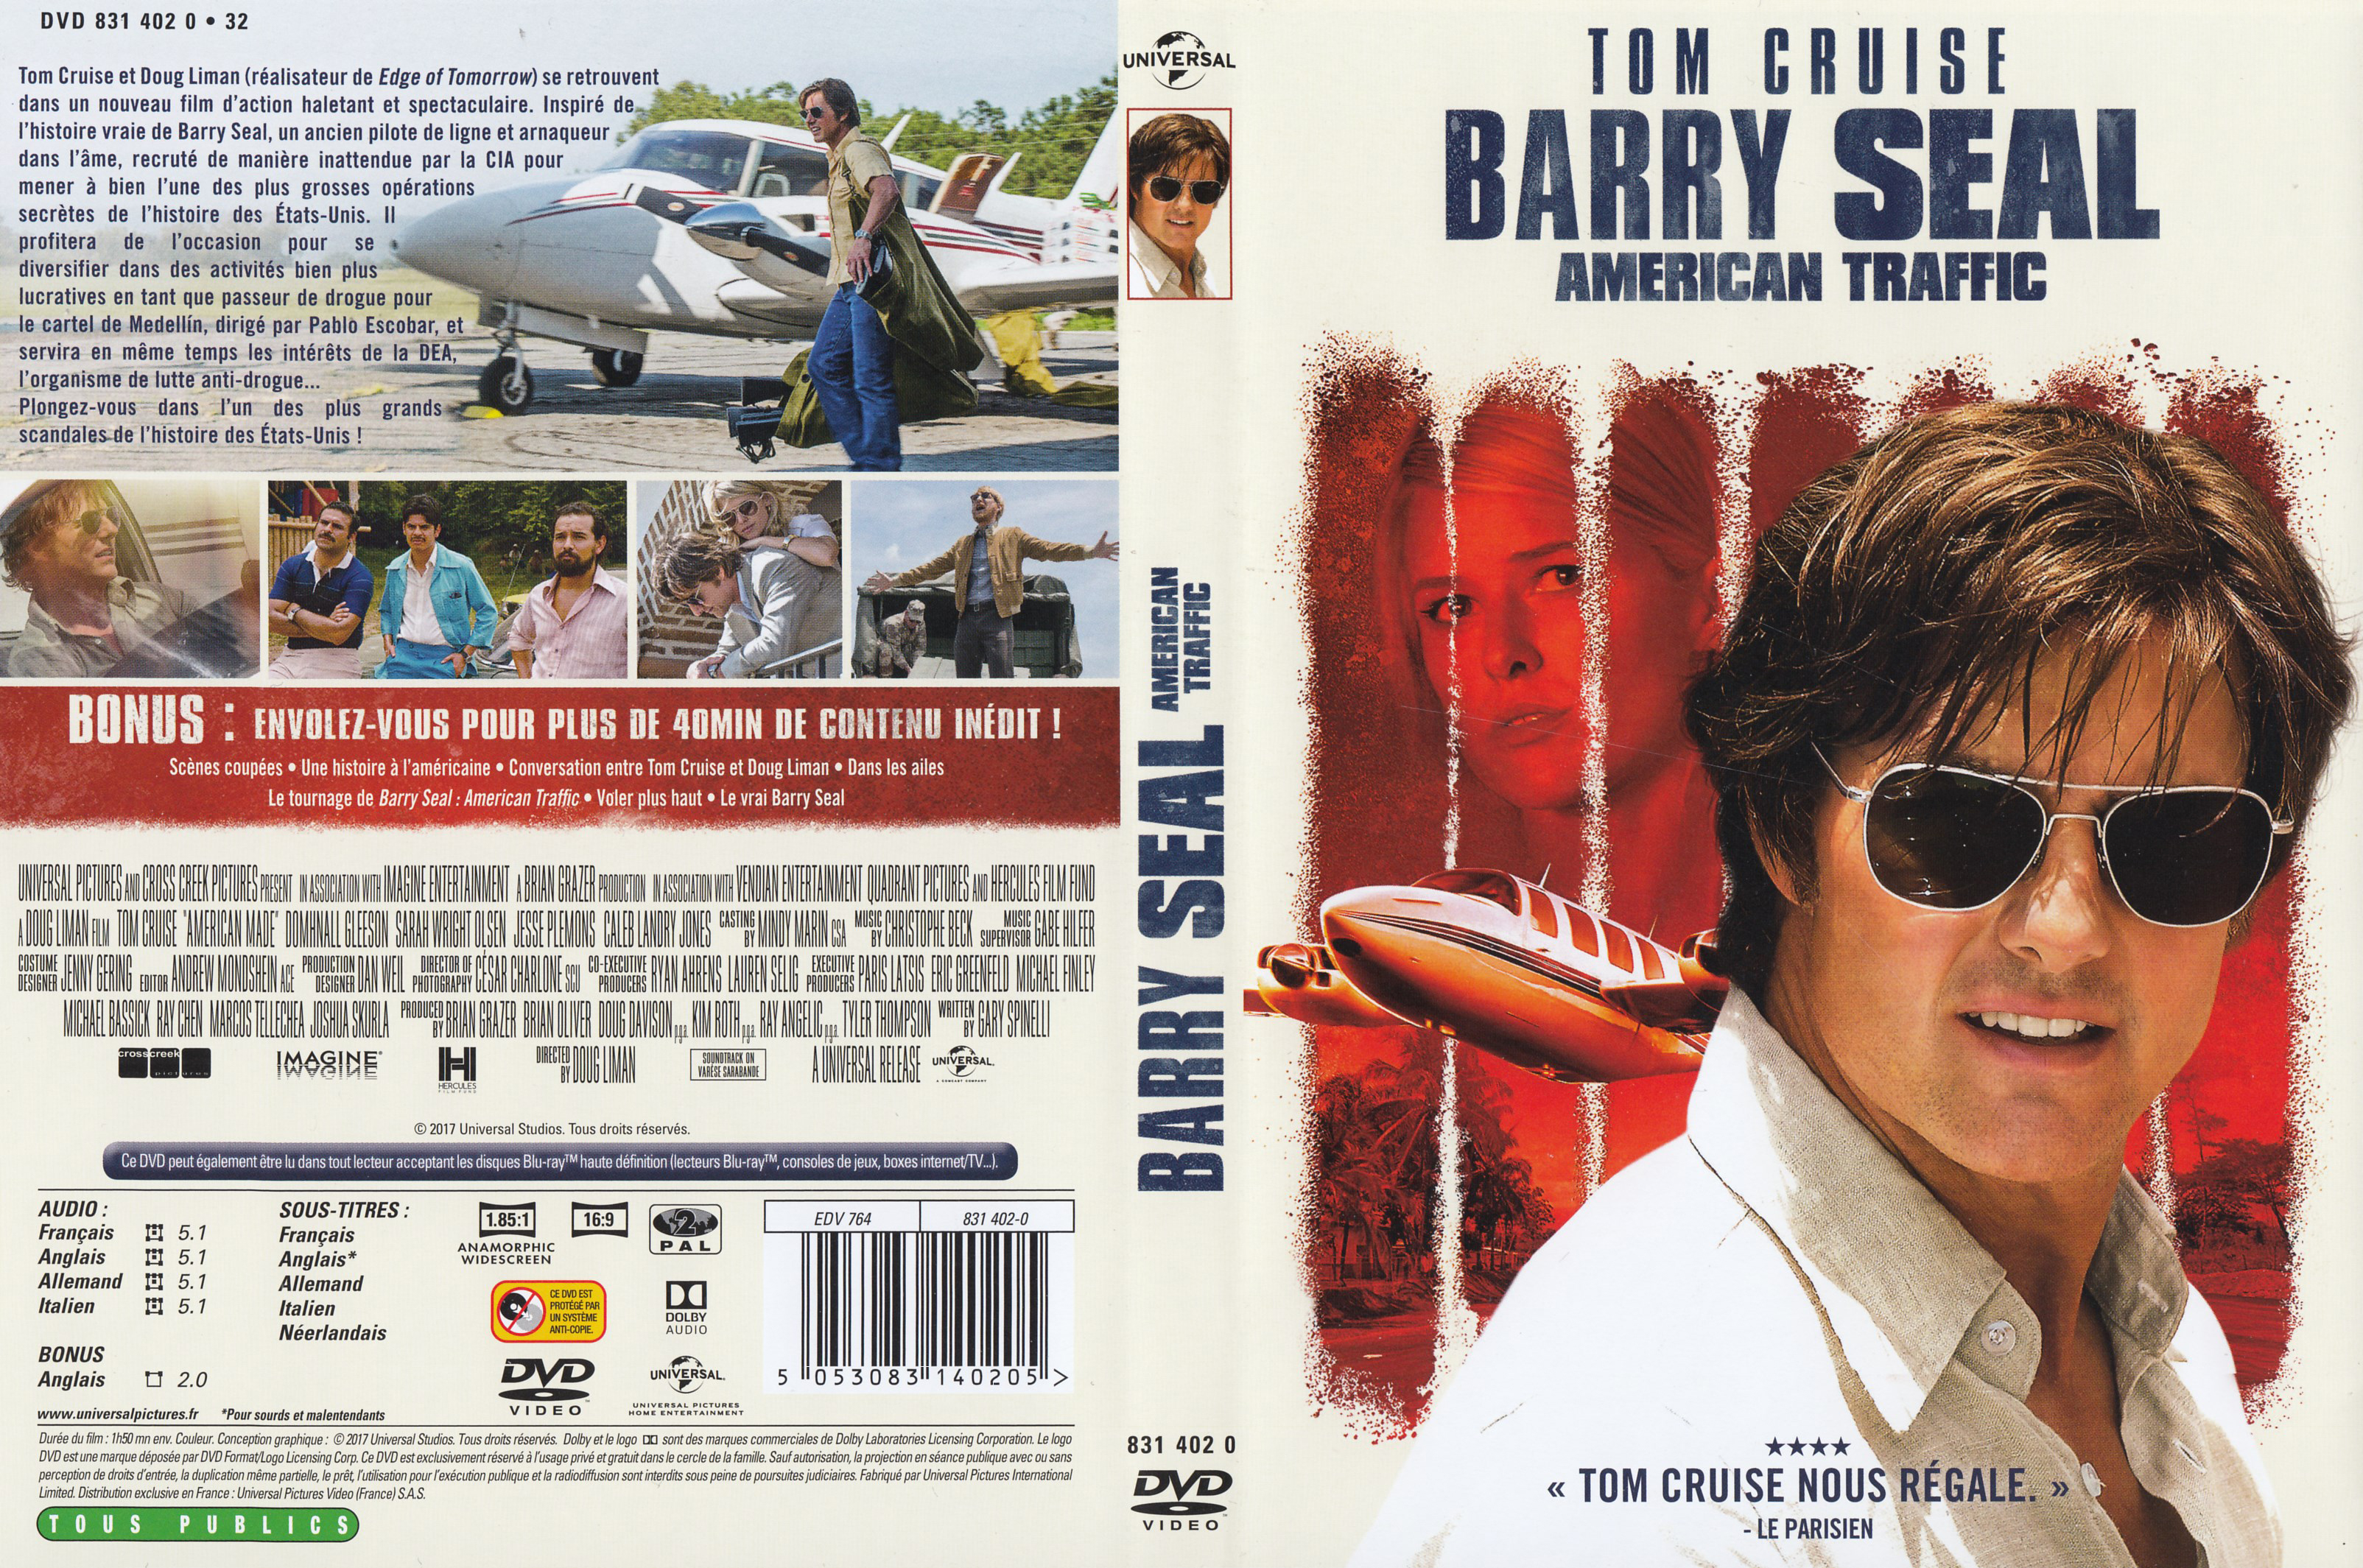 Jaquette DVD Barry seal American traffic